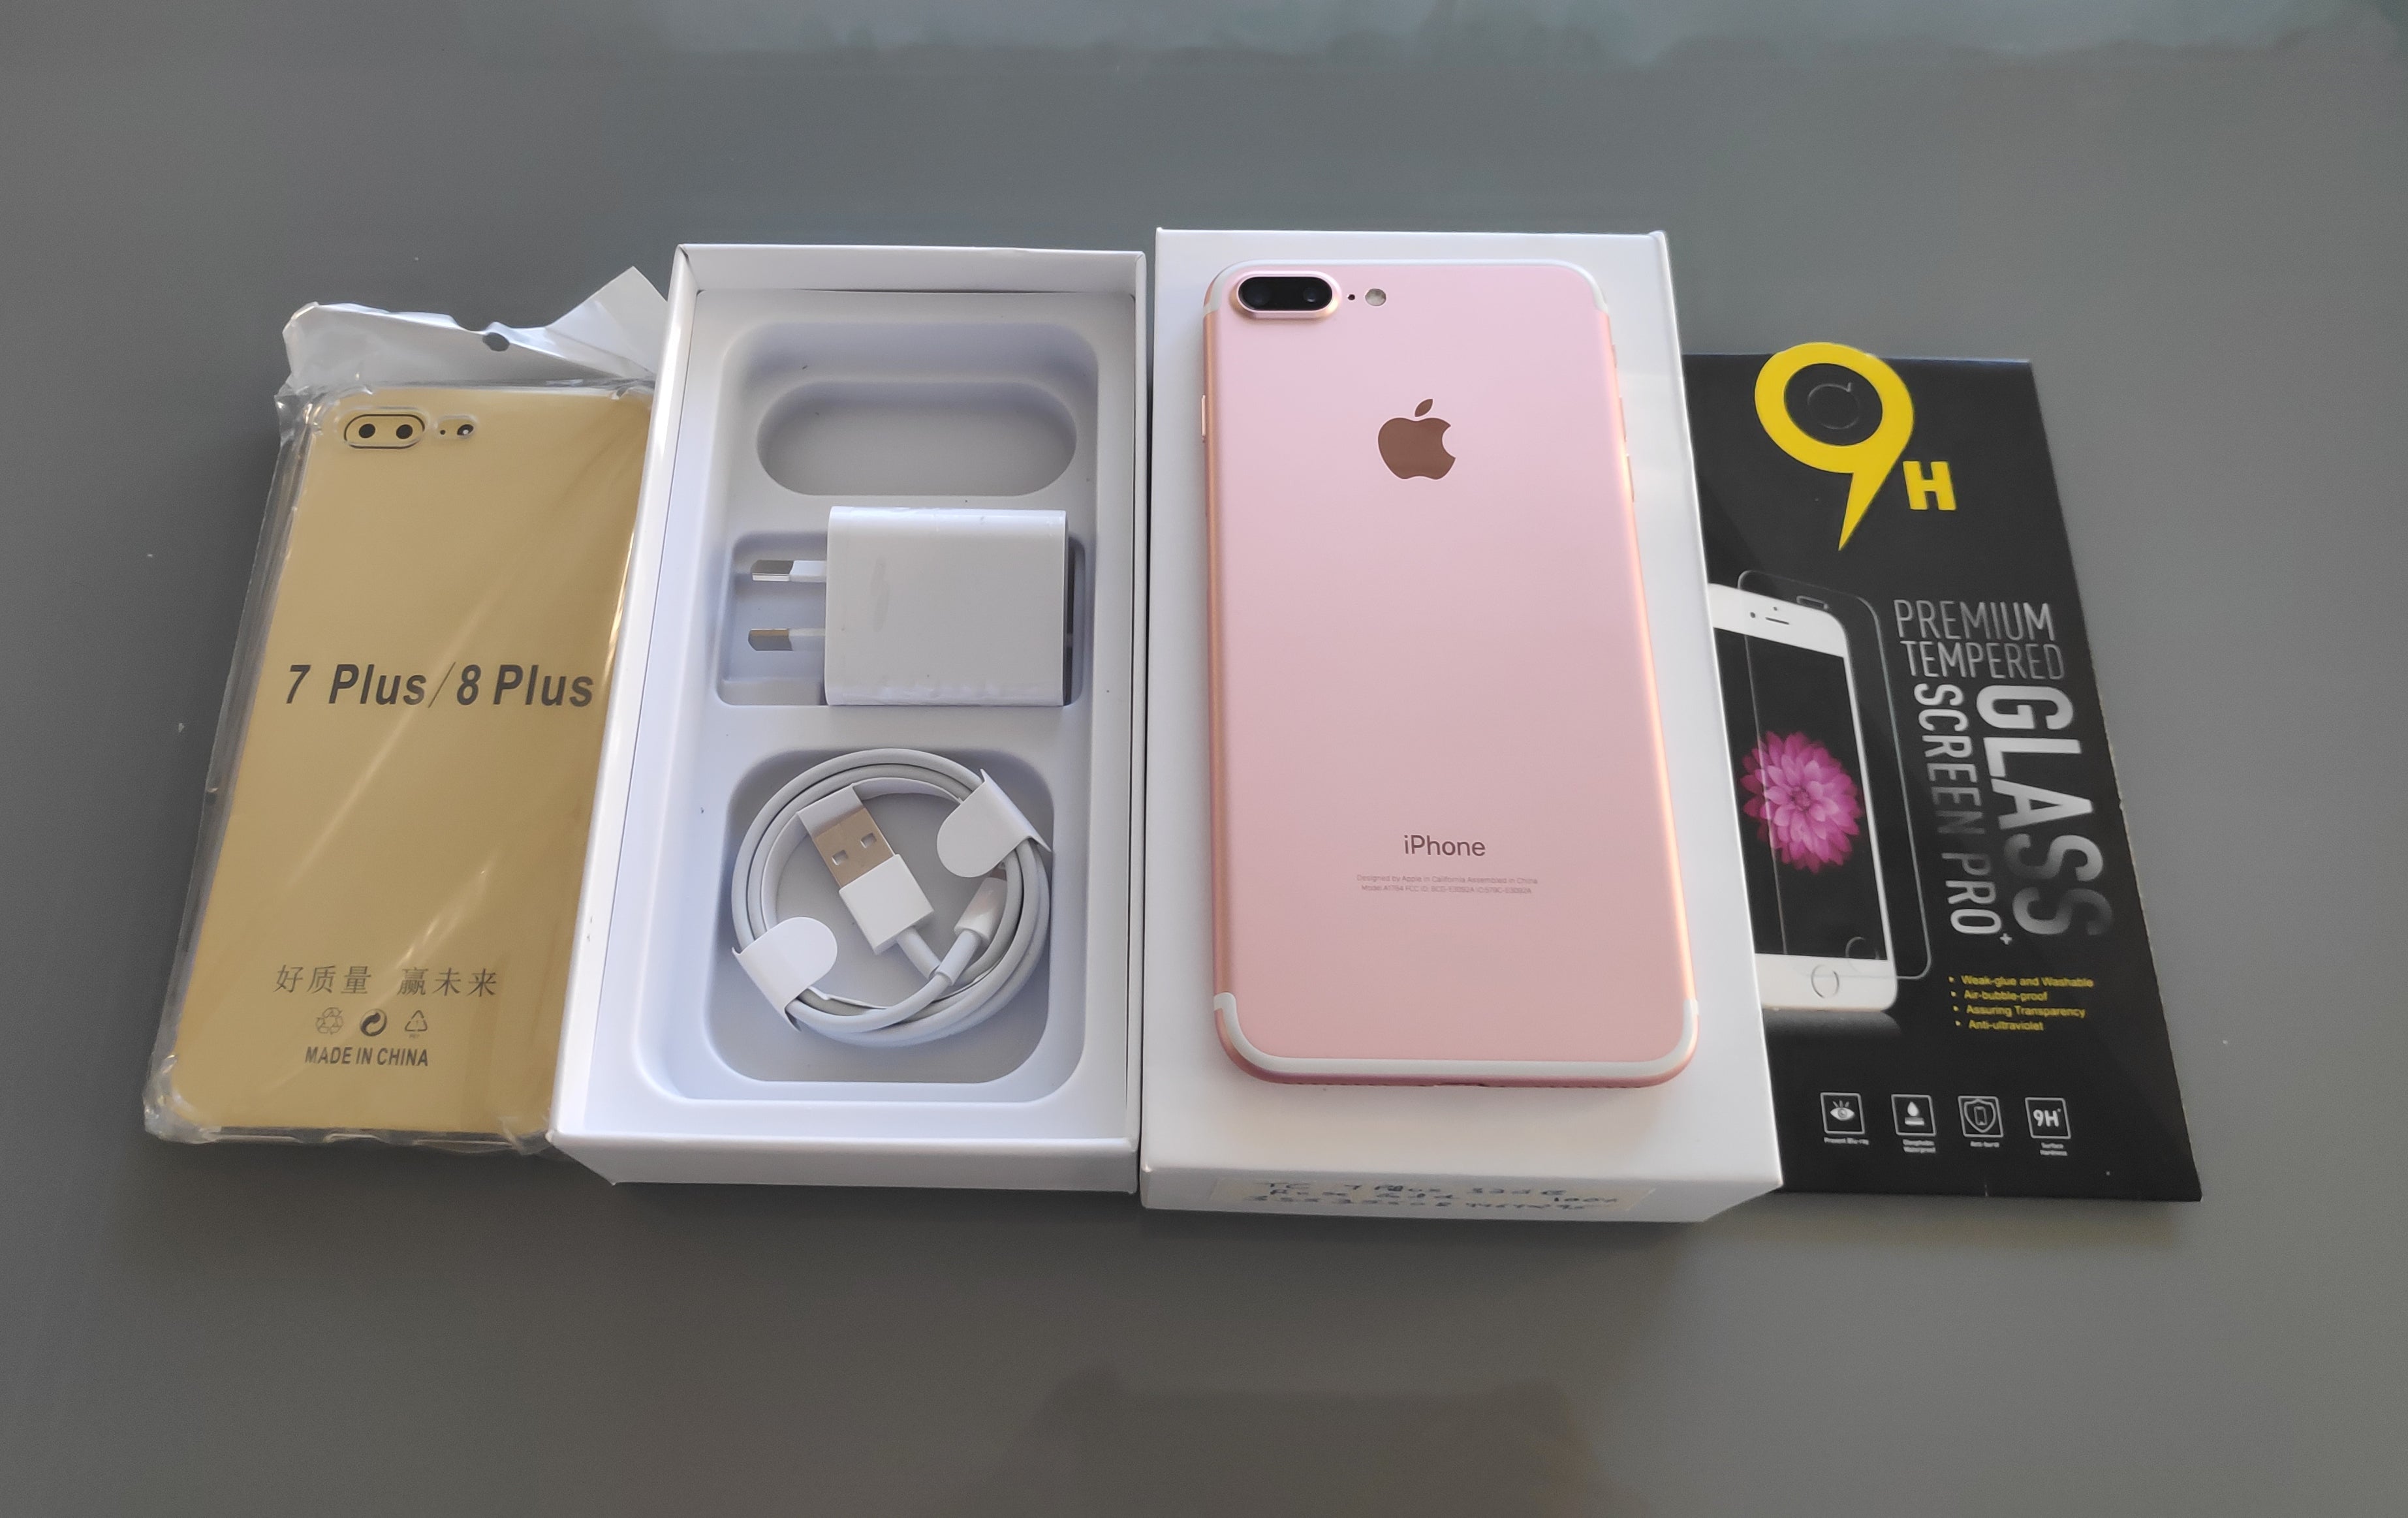 Apple iPhone 7 Plus 128GB Rose Gold - New Battery, Case & Glass Screen Protector (As New)